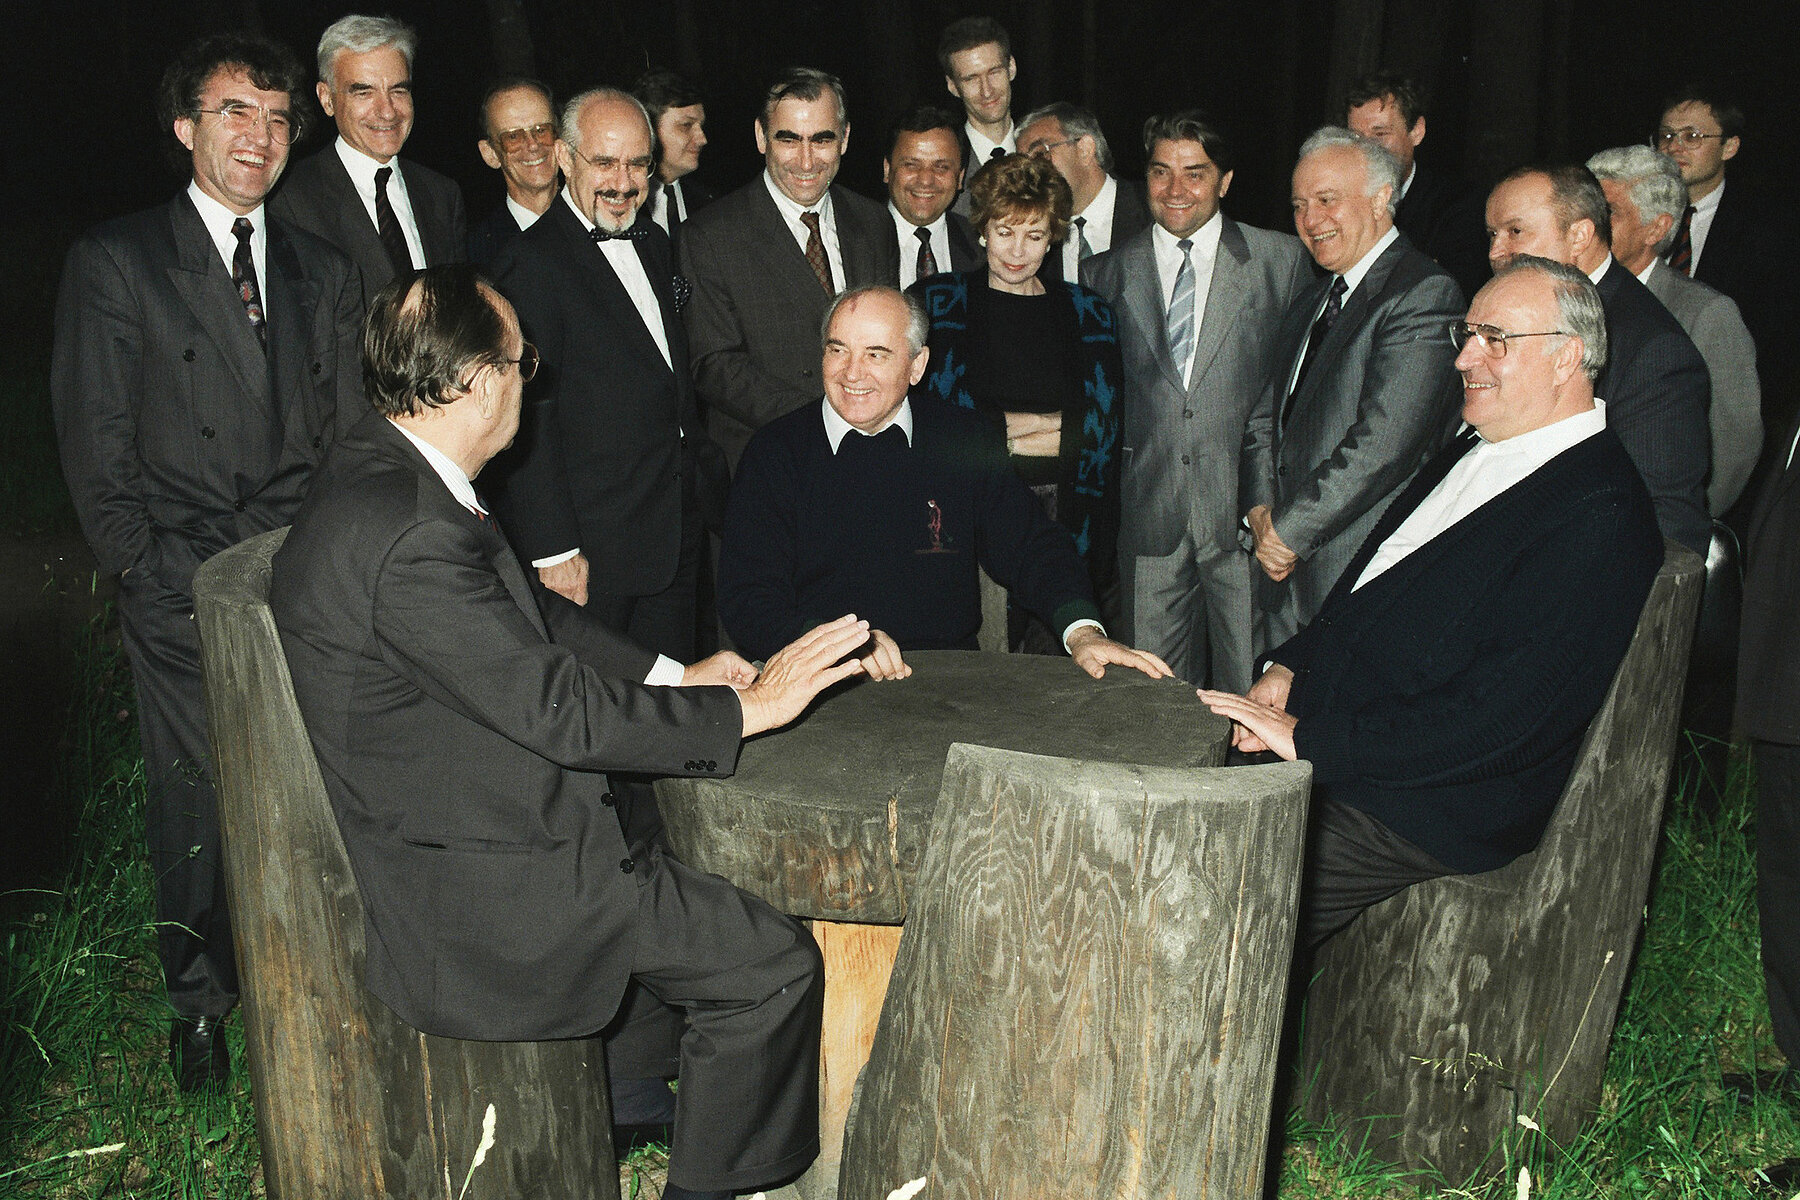 Three men are seated at a round wooden table. Behind them are several men and a woman in suits. It's night.